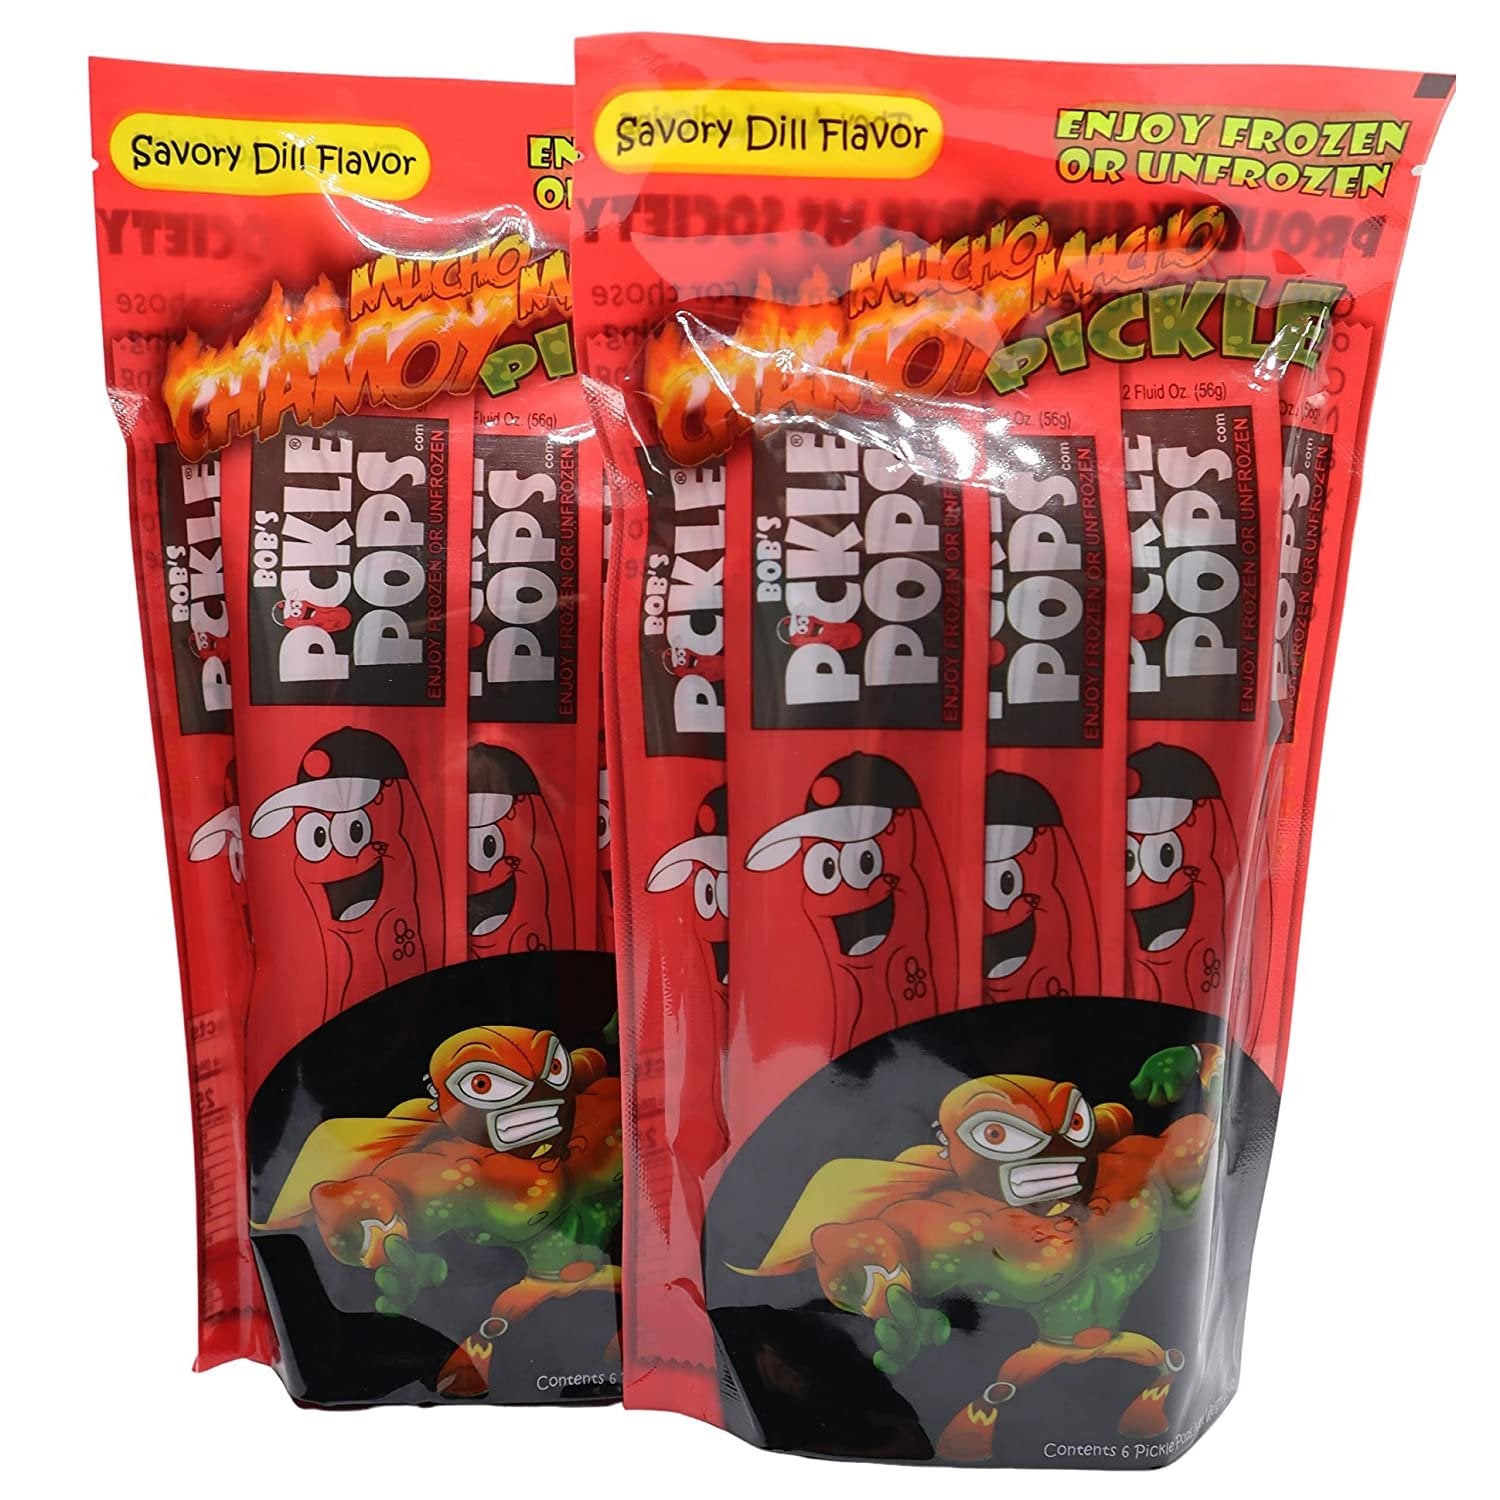 Food Crush Choose Your Own Variety Pickle-In-A-Pouch Sampler-Chamoy Pickles Single Pouch, Warhead Pickle, Hot Pickle or Kleins Dill-To Mix with Mexican